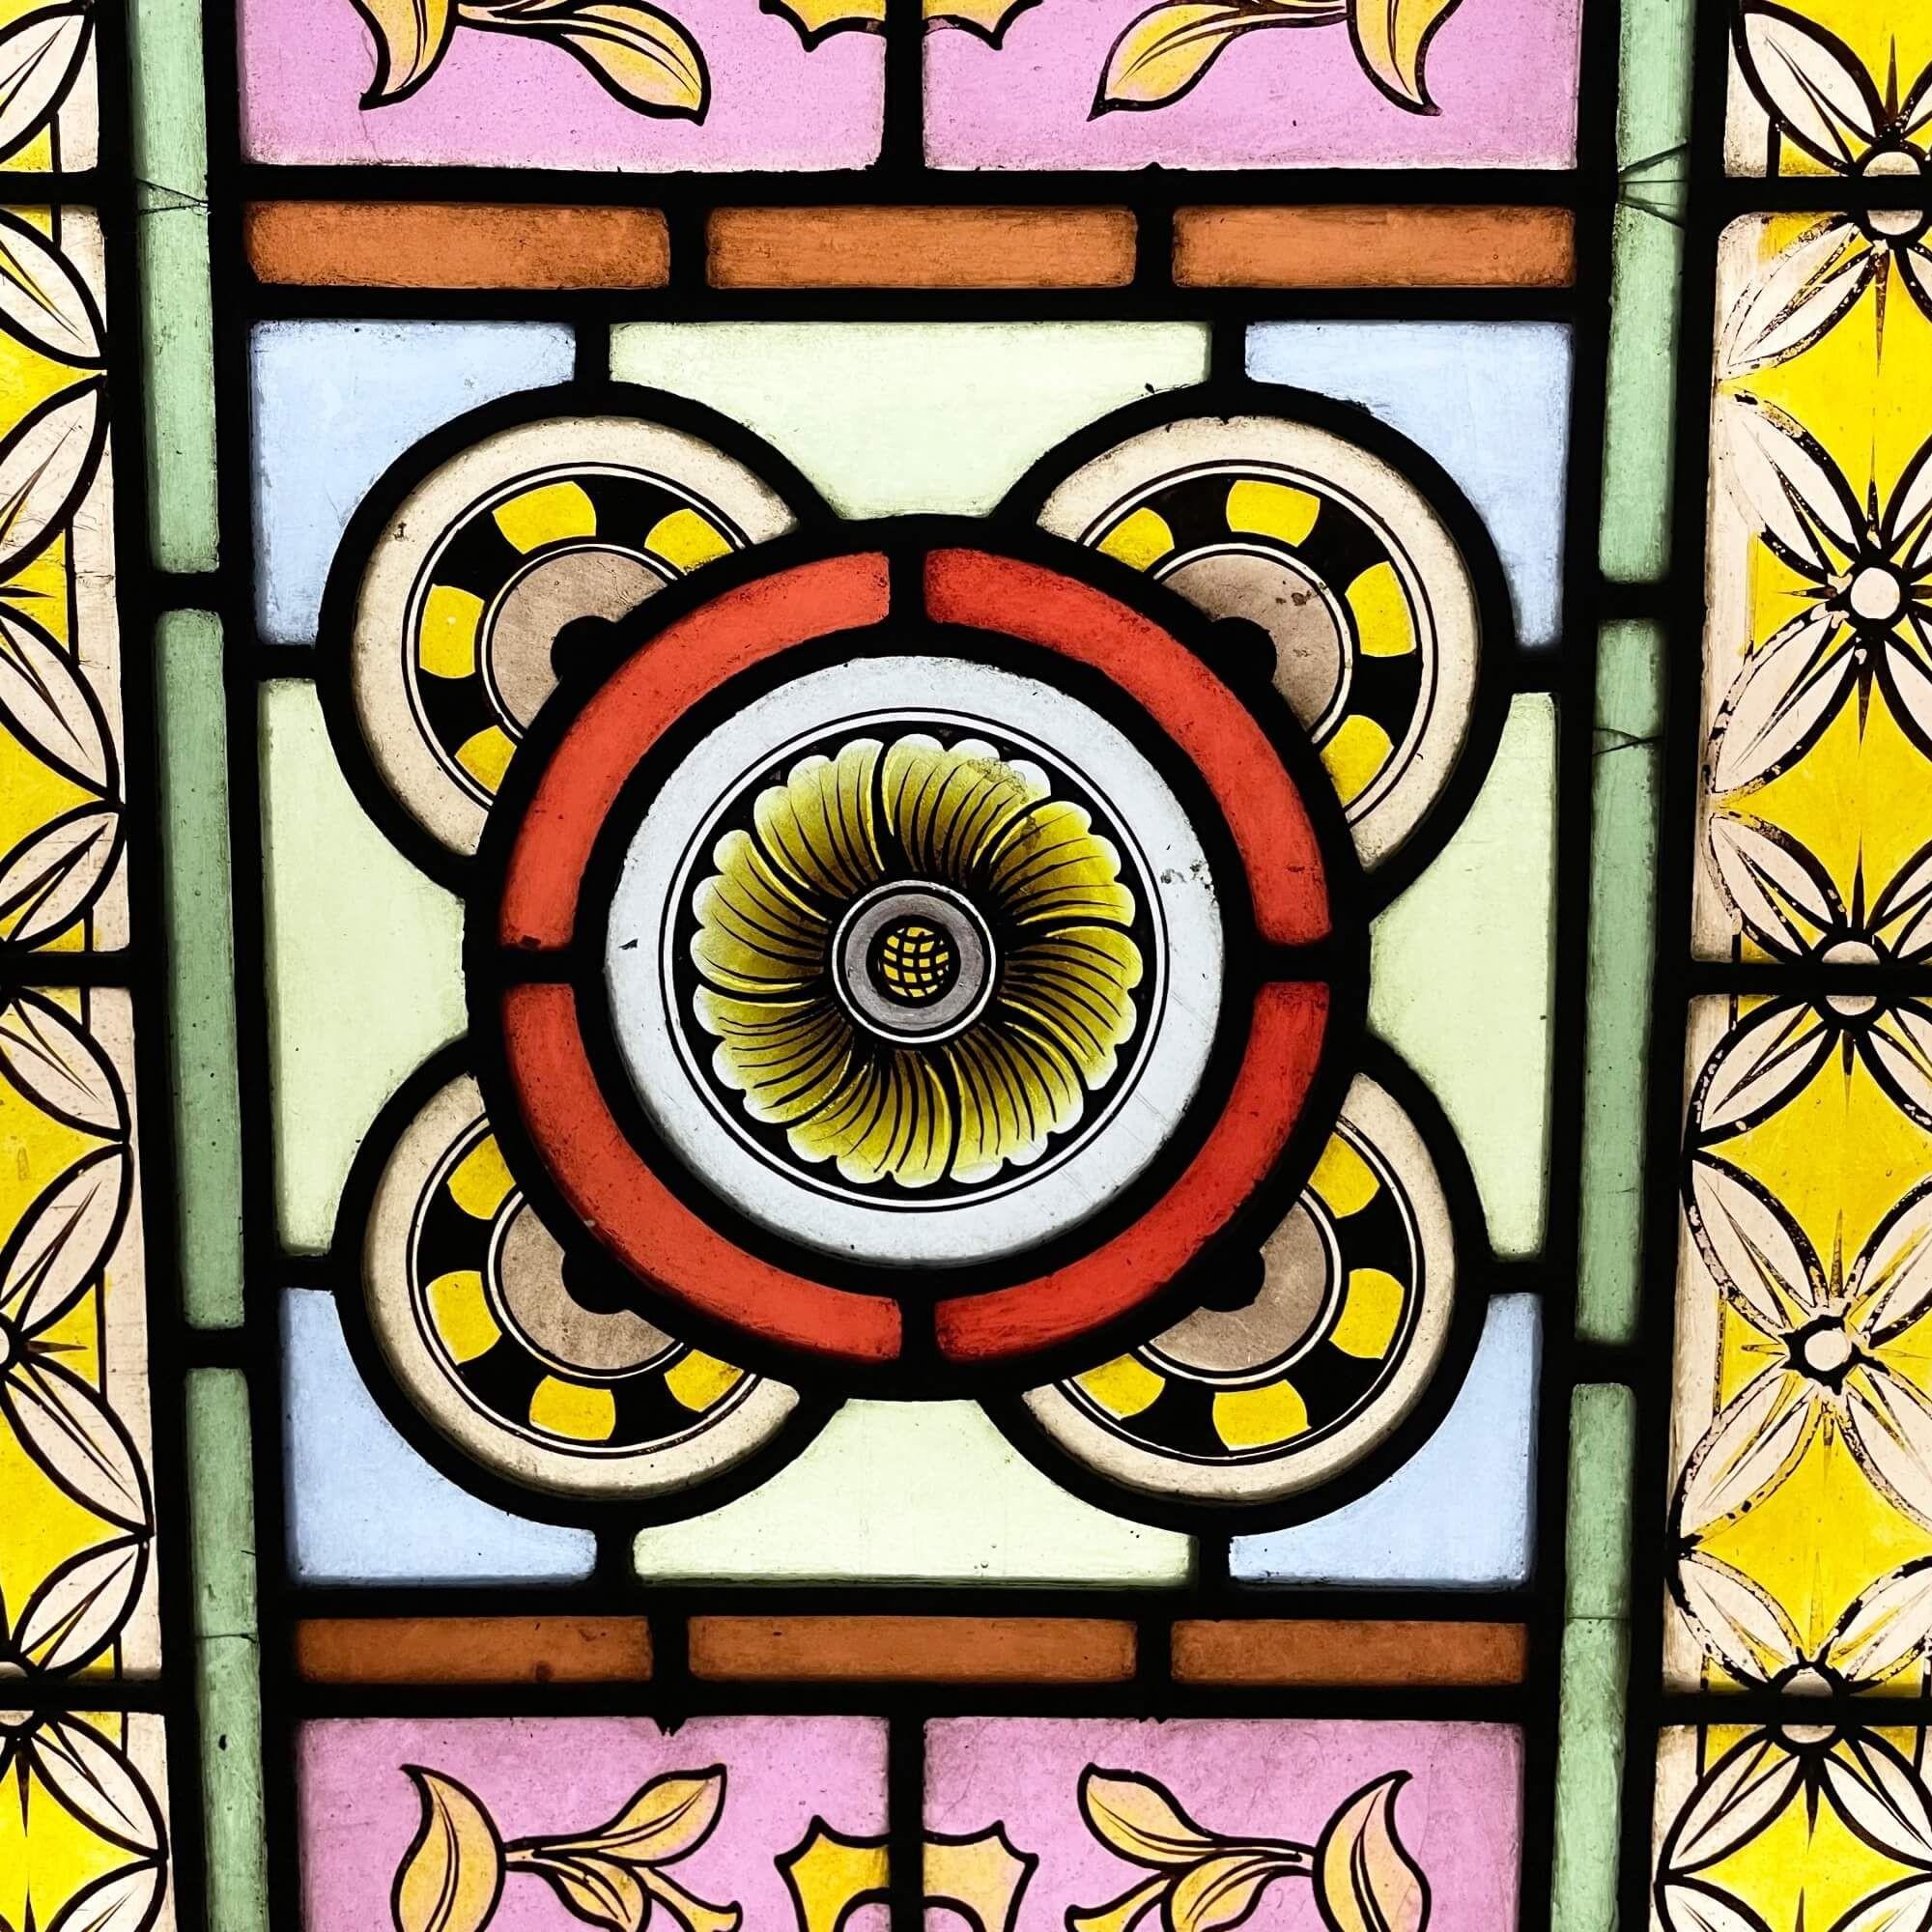 English Vibrant Antique Victorian Stained Glass Window